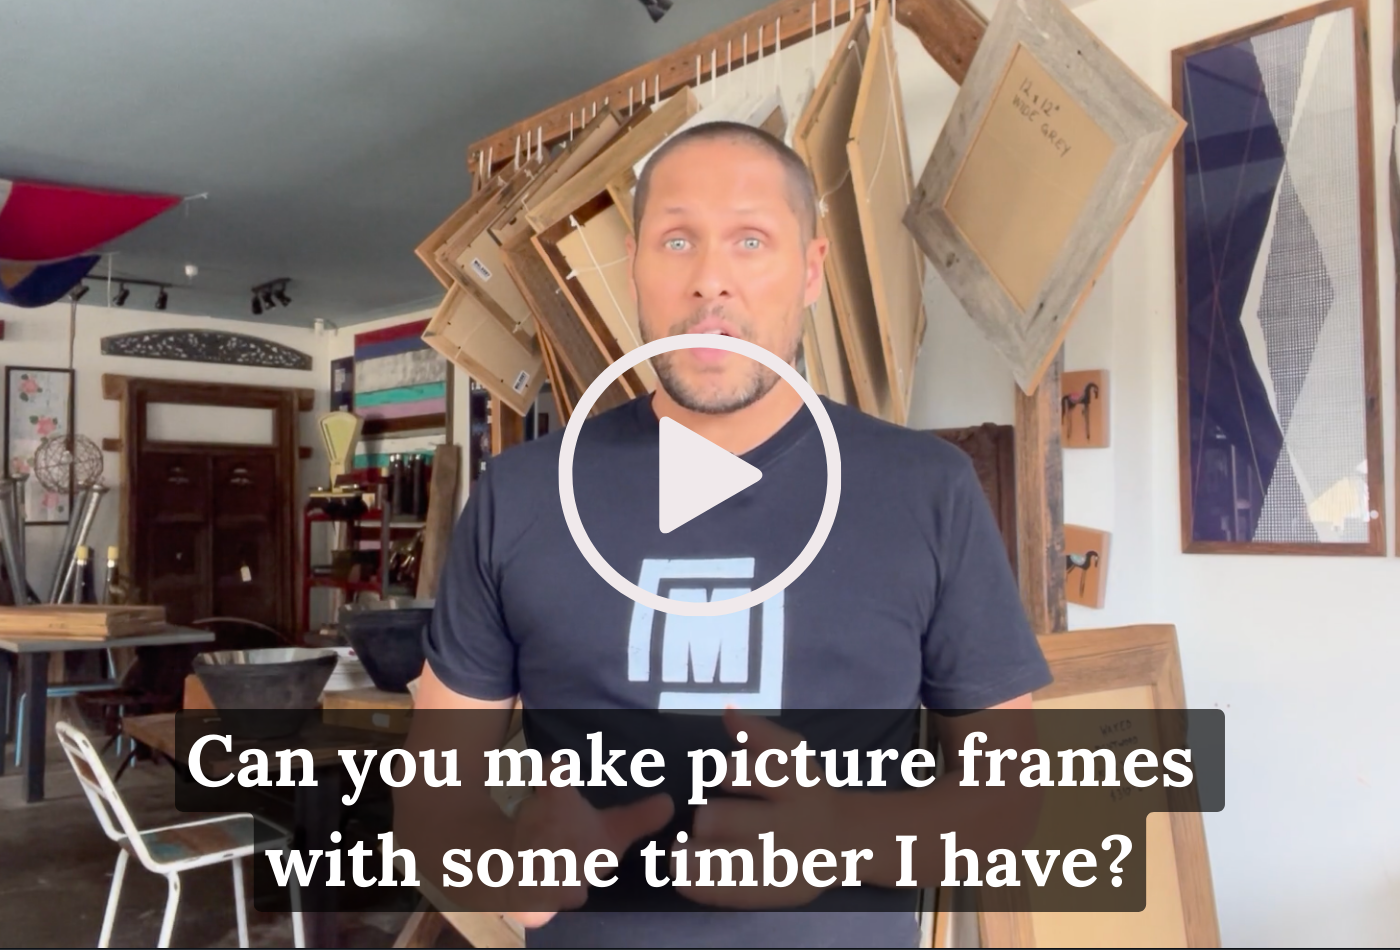 Can you make picture frames with some timber I have?